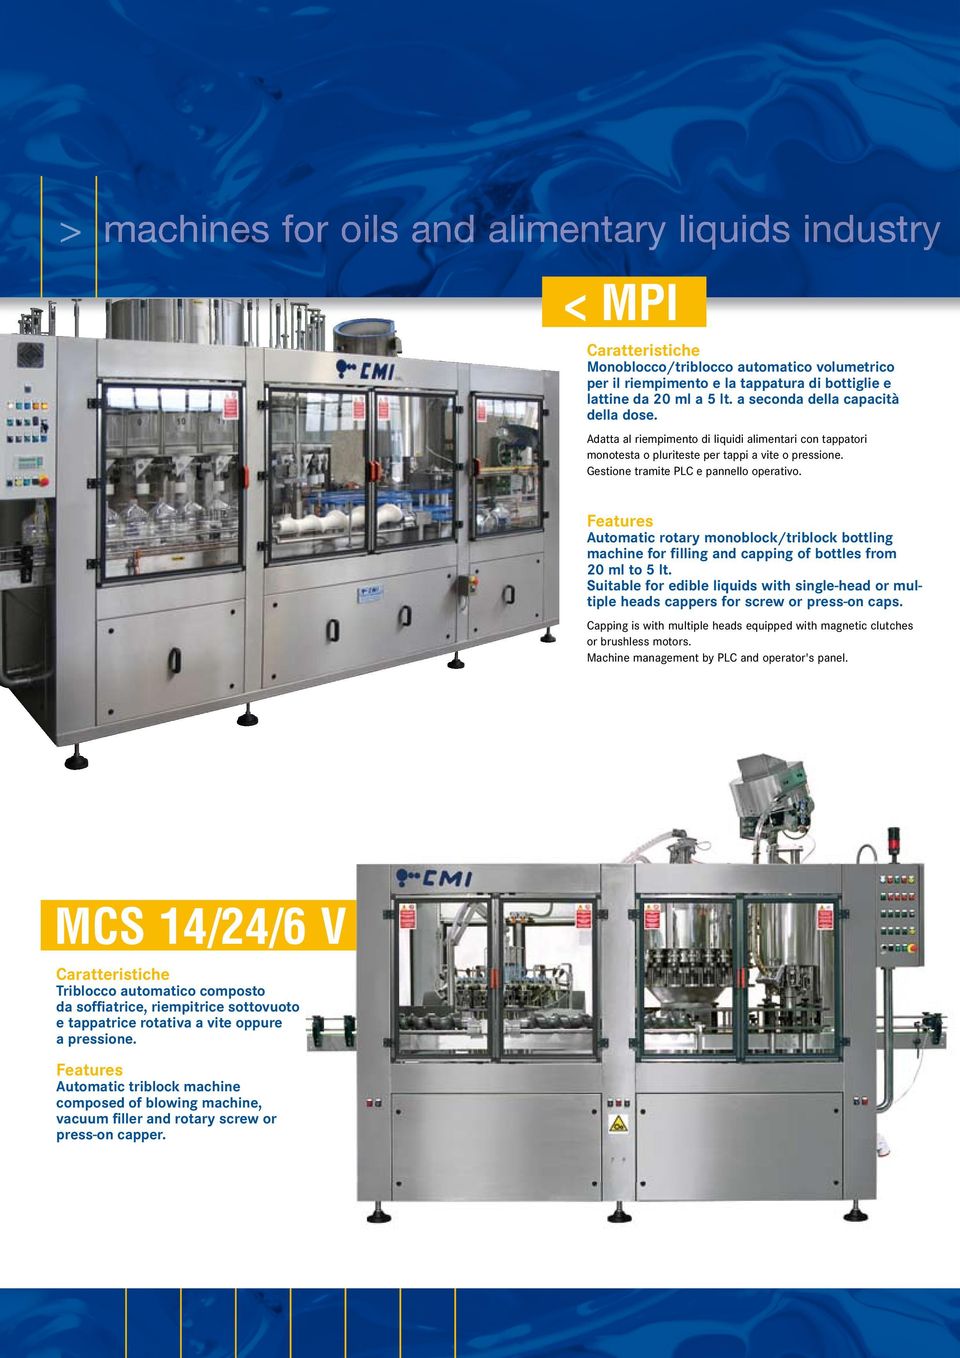 Automatic rotary monoblock/triblock bottling machine for filling and capping of bottles from 20 ml to 5 lt.